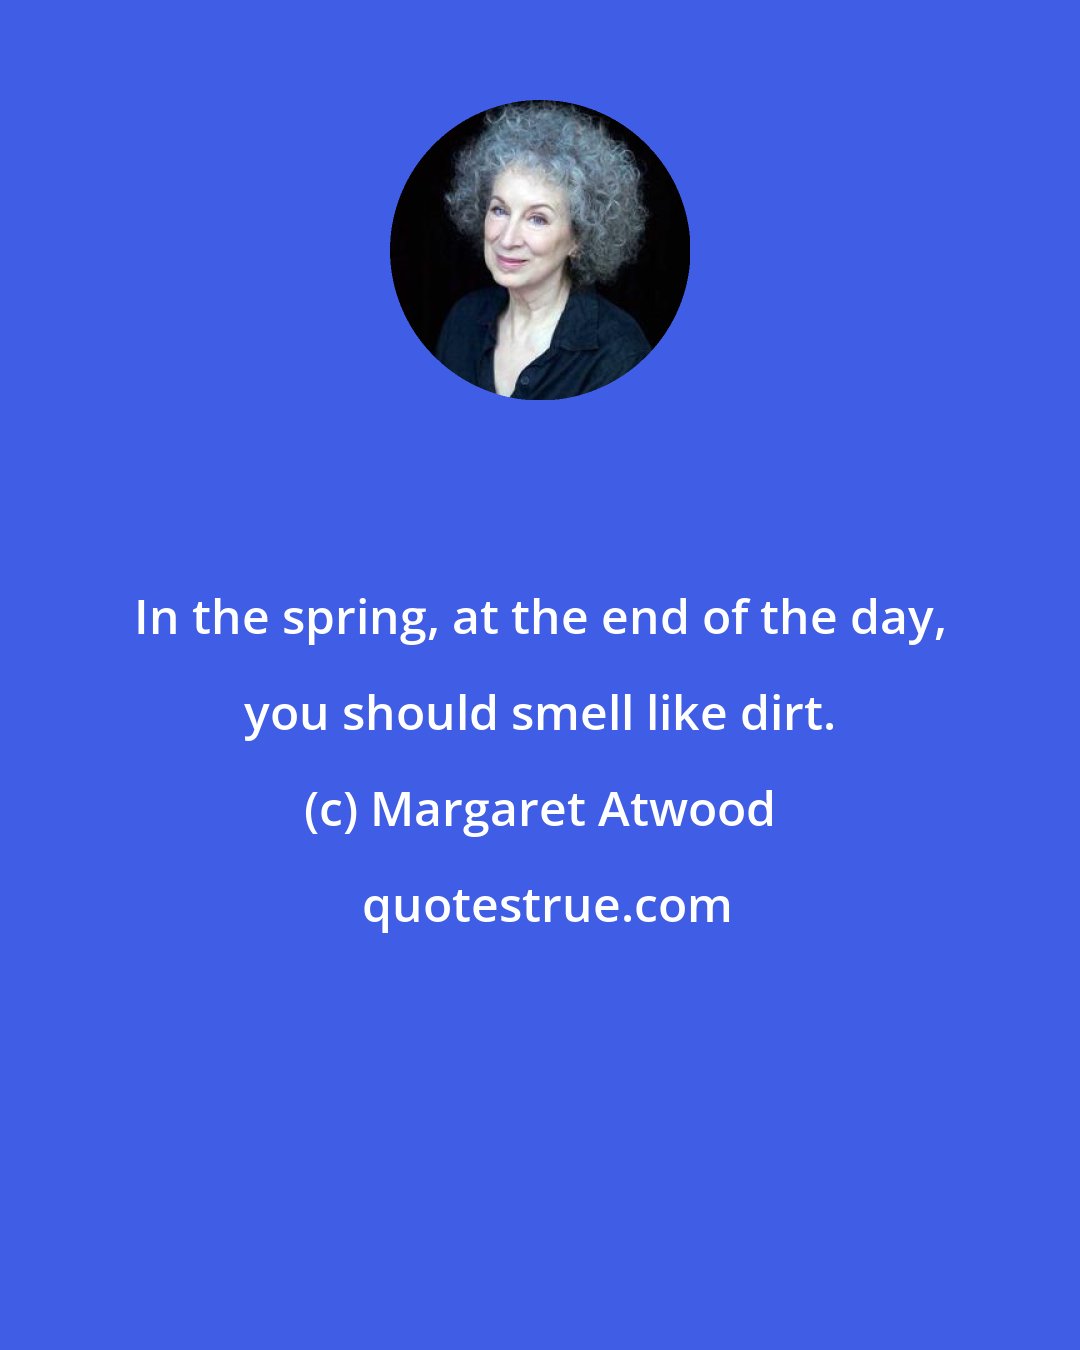 Margaret Atwood: In the spring, at the end of the day, you should smell like dirt.